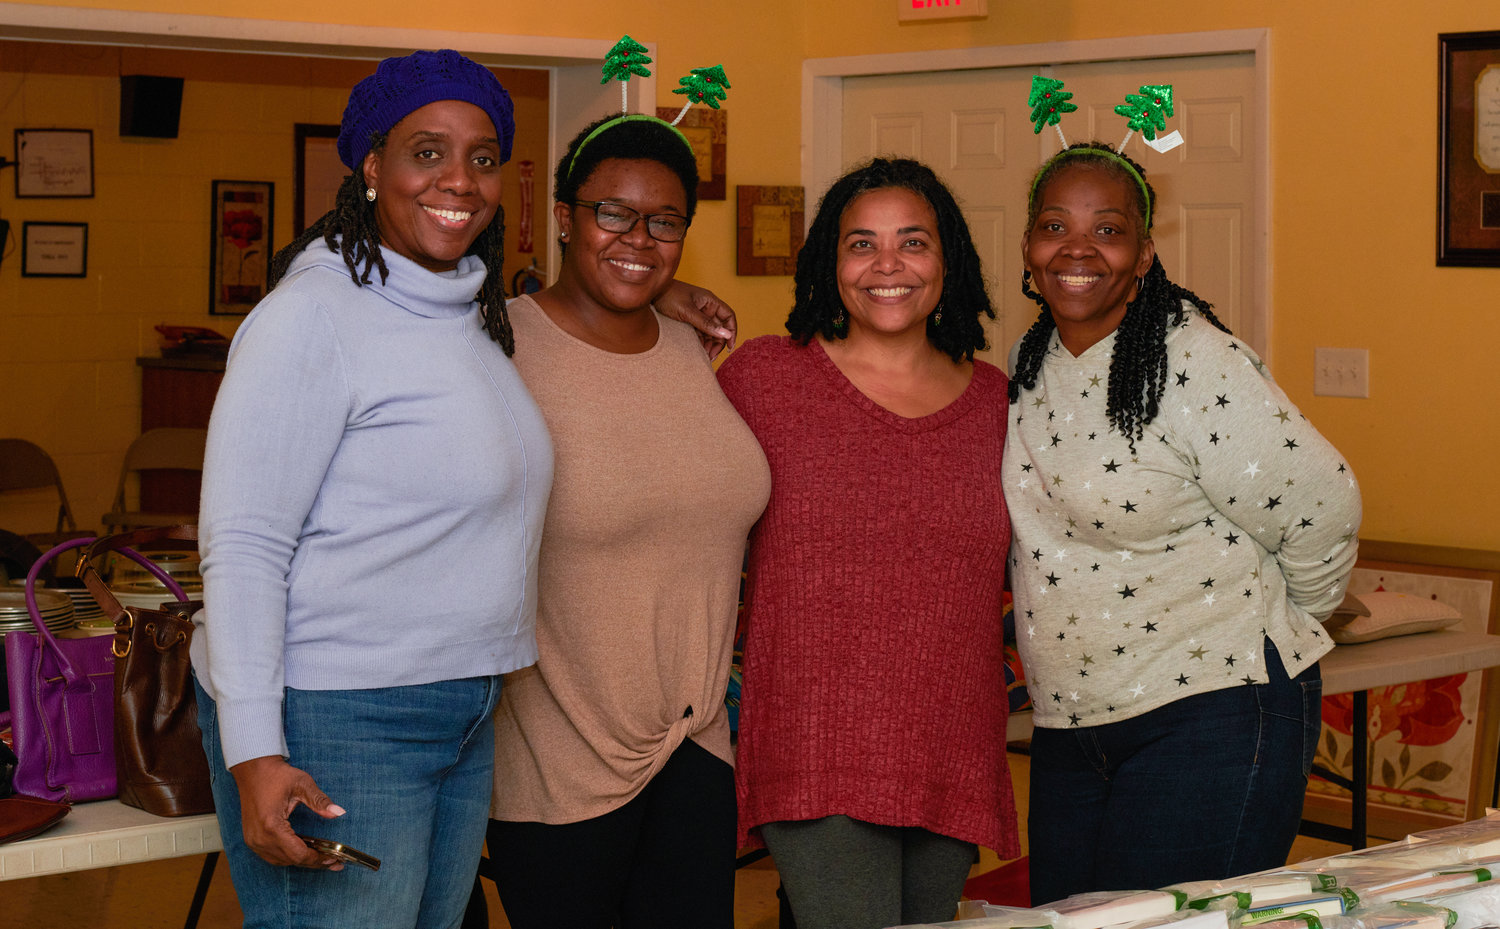 Members of Community Organizing for Racial Equity (CORE) and Union Taylors Community Center helped to direct individuals at the fundraiser at Taylors Chapel Missionary Baptist Church. Pictured here left to right: Stephanie Terry, Michelle Wright, Karinda Roebuck and Samantha Goldston.